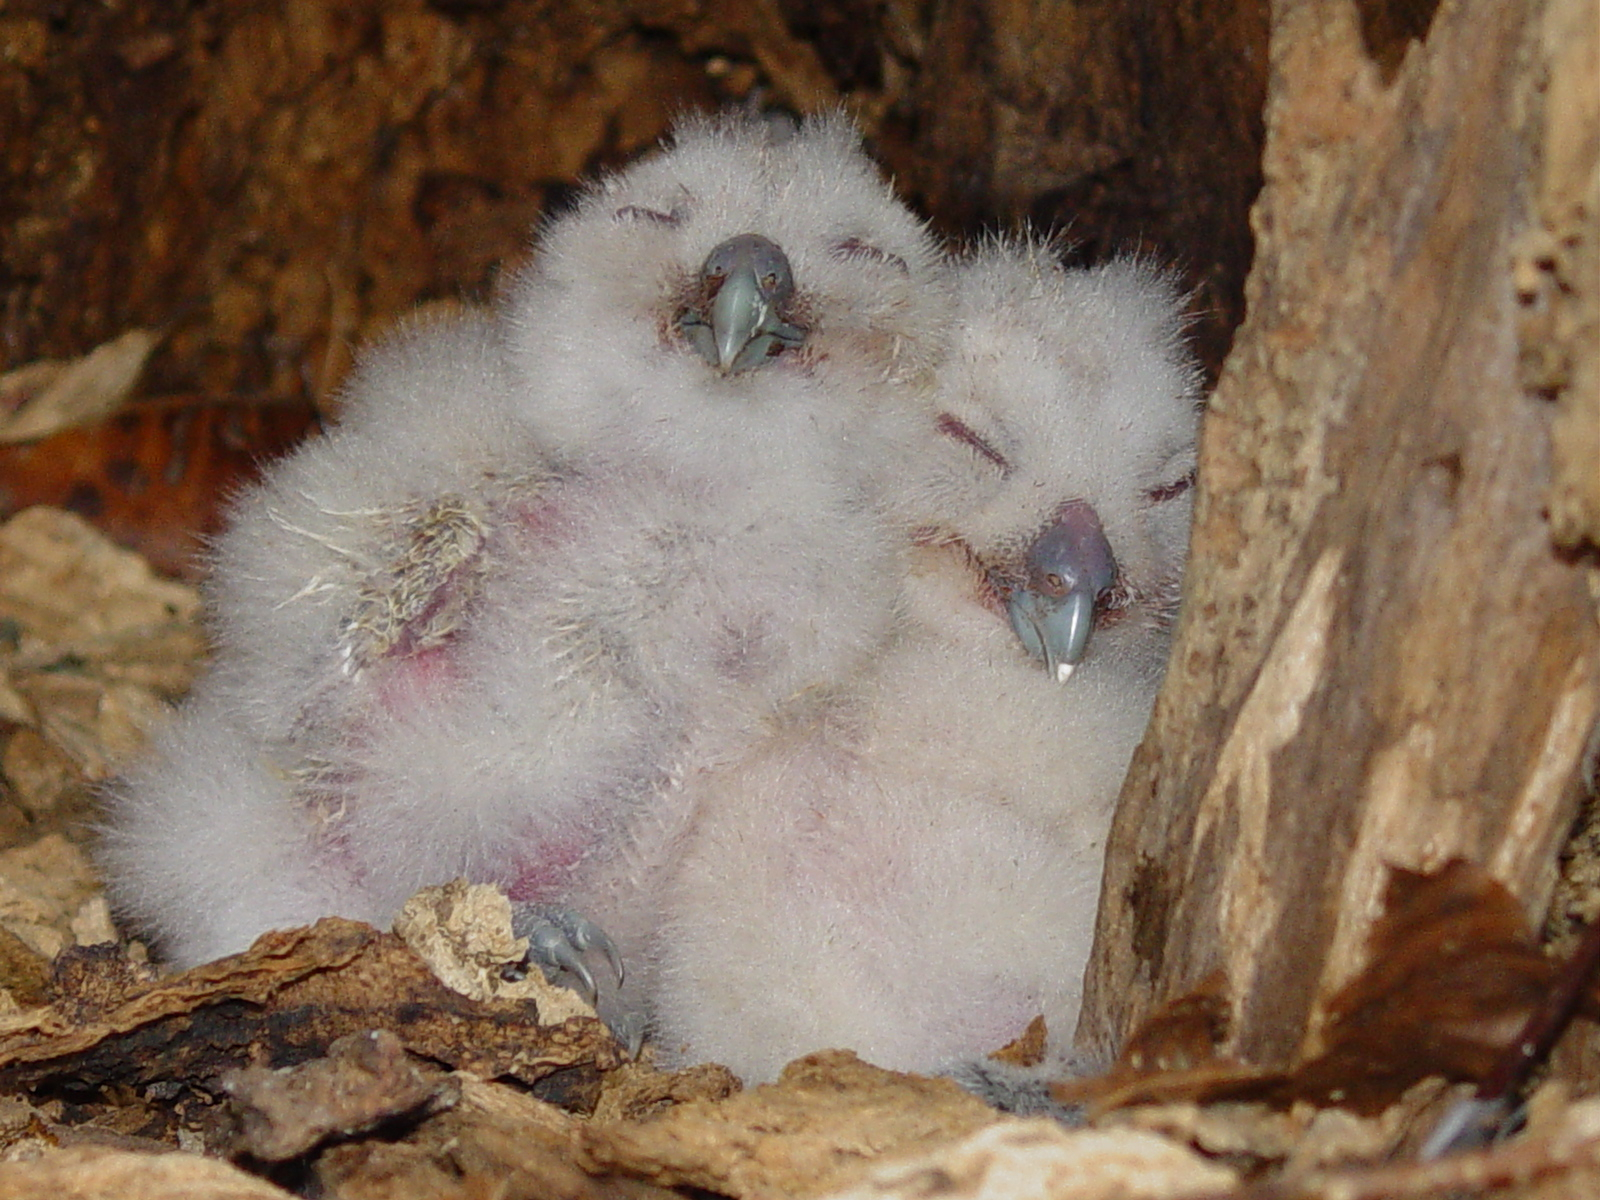 A pair of baby owls snuggle up together